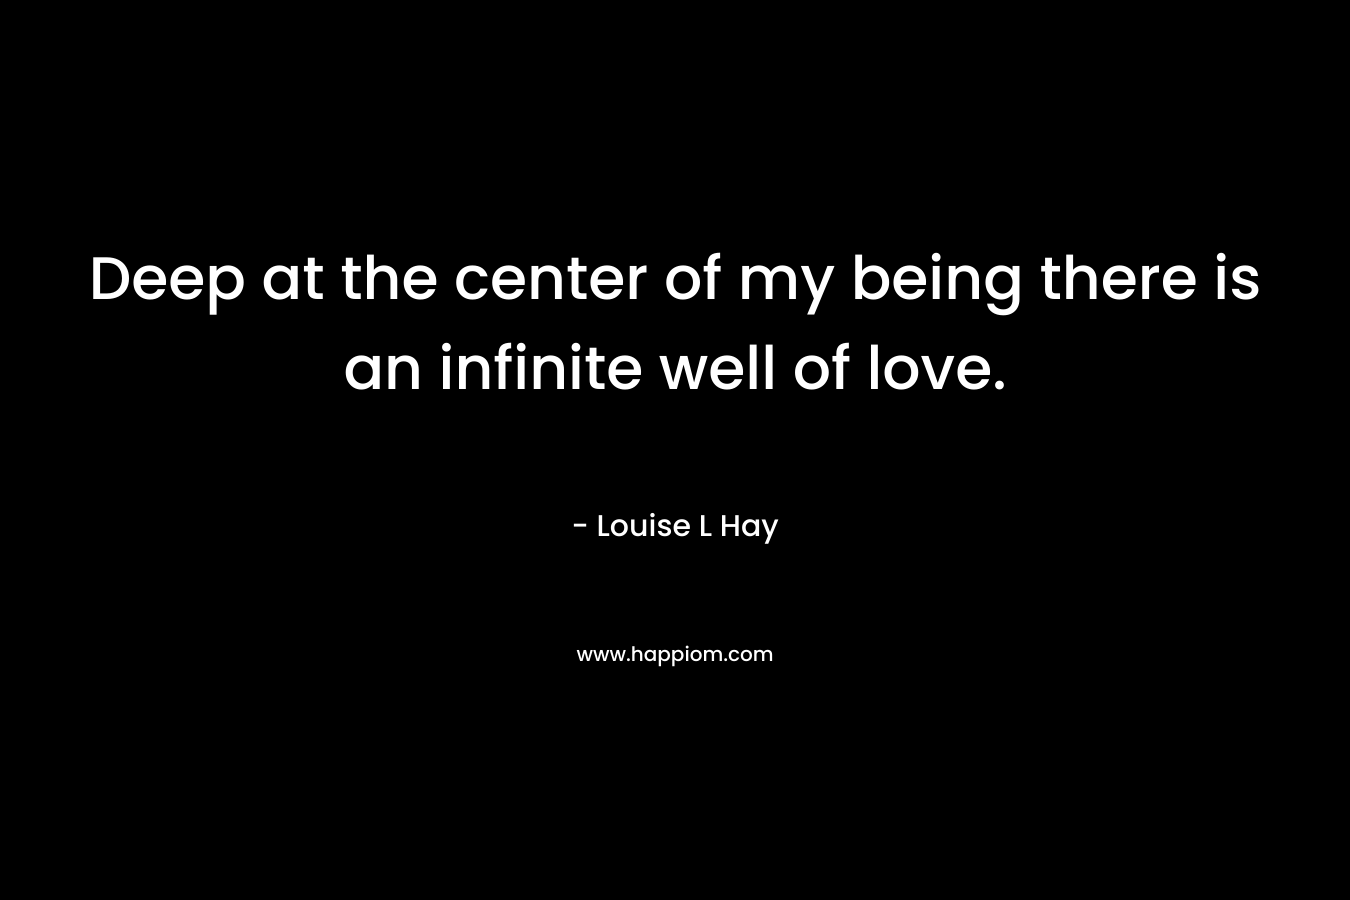 Deep at the center of my being there is an infinite well of love.